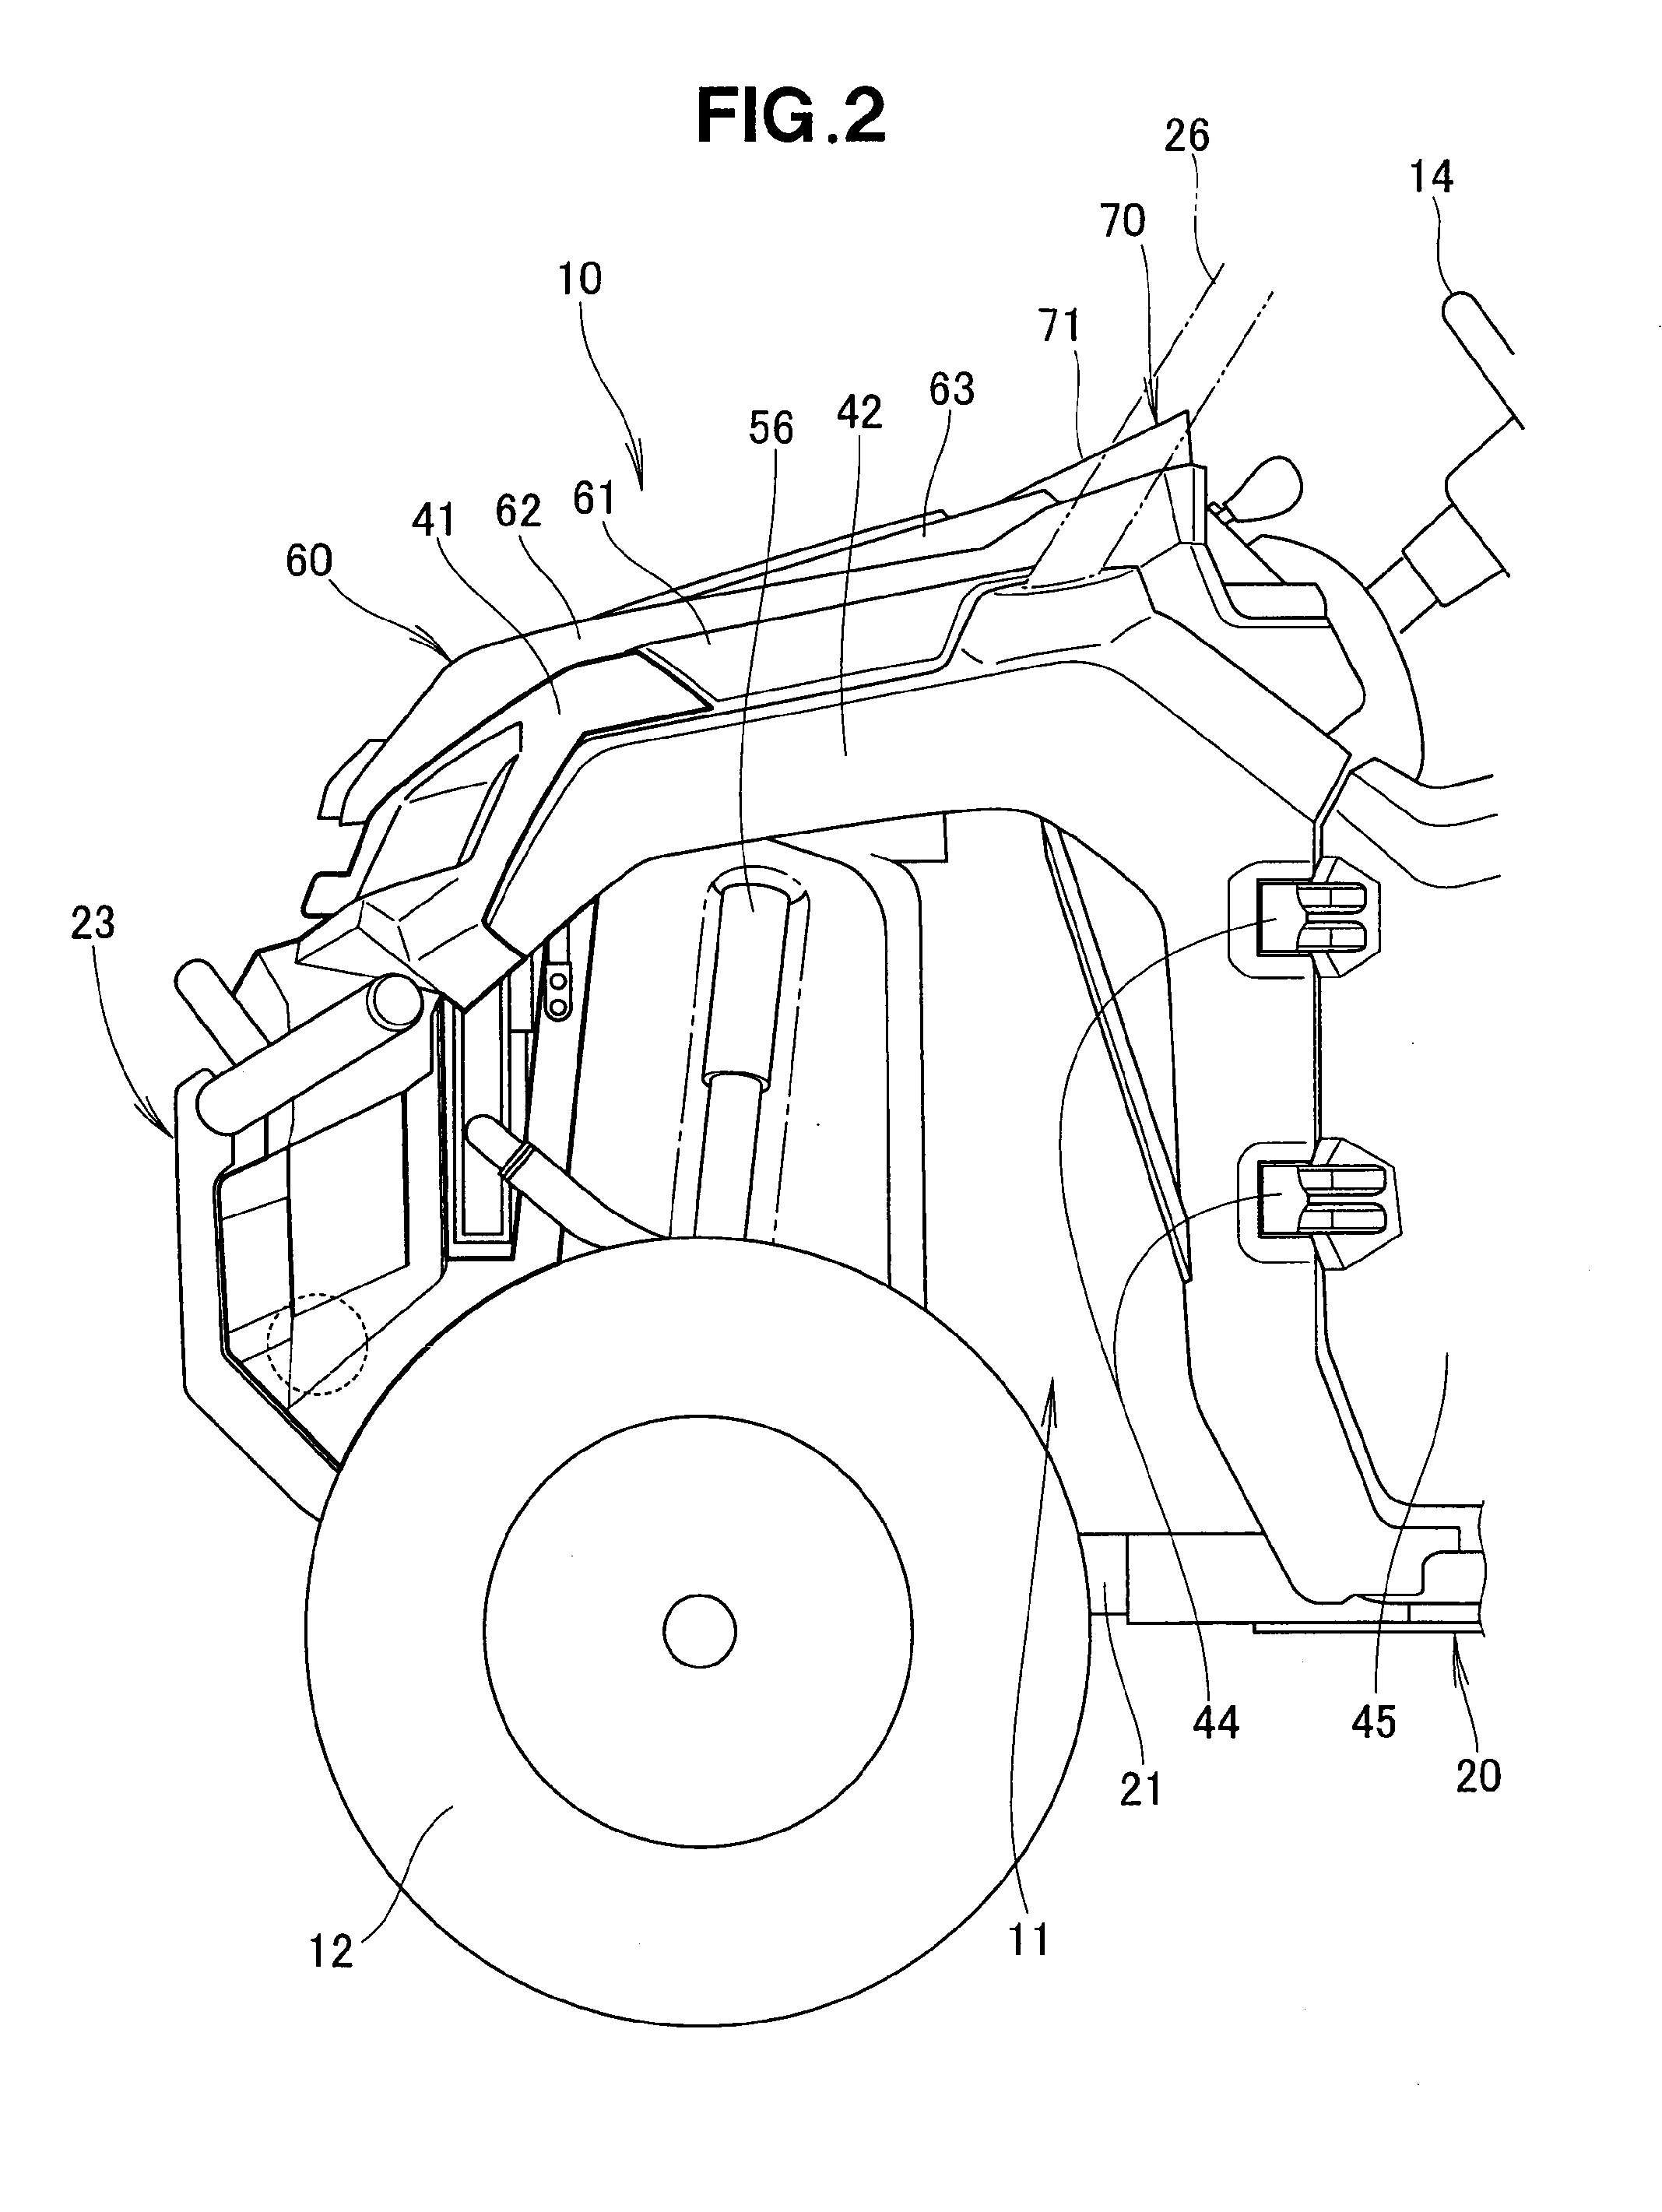 Hood structure for uneven terrain traveling vehicle